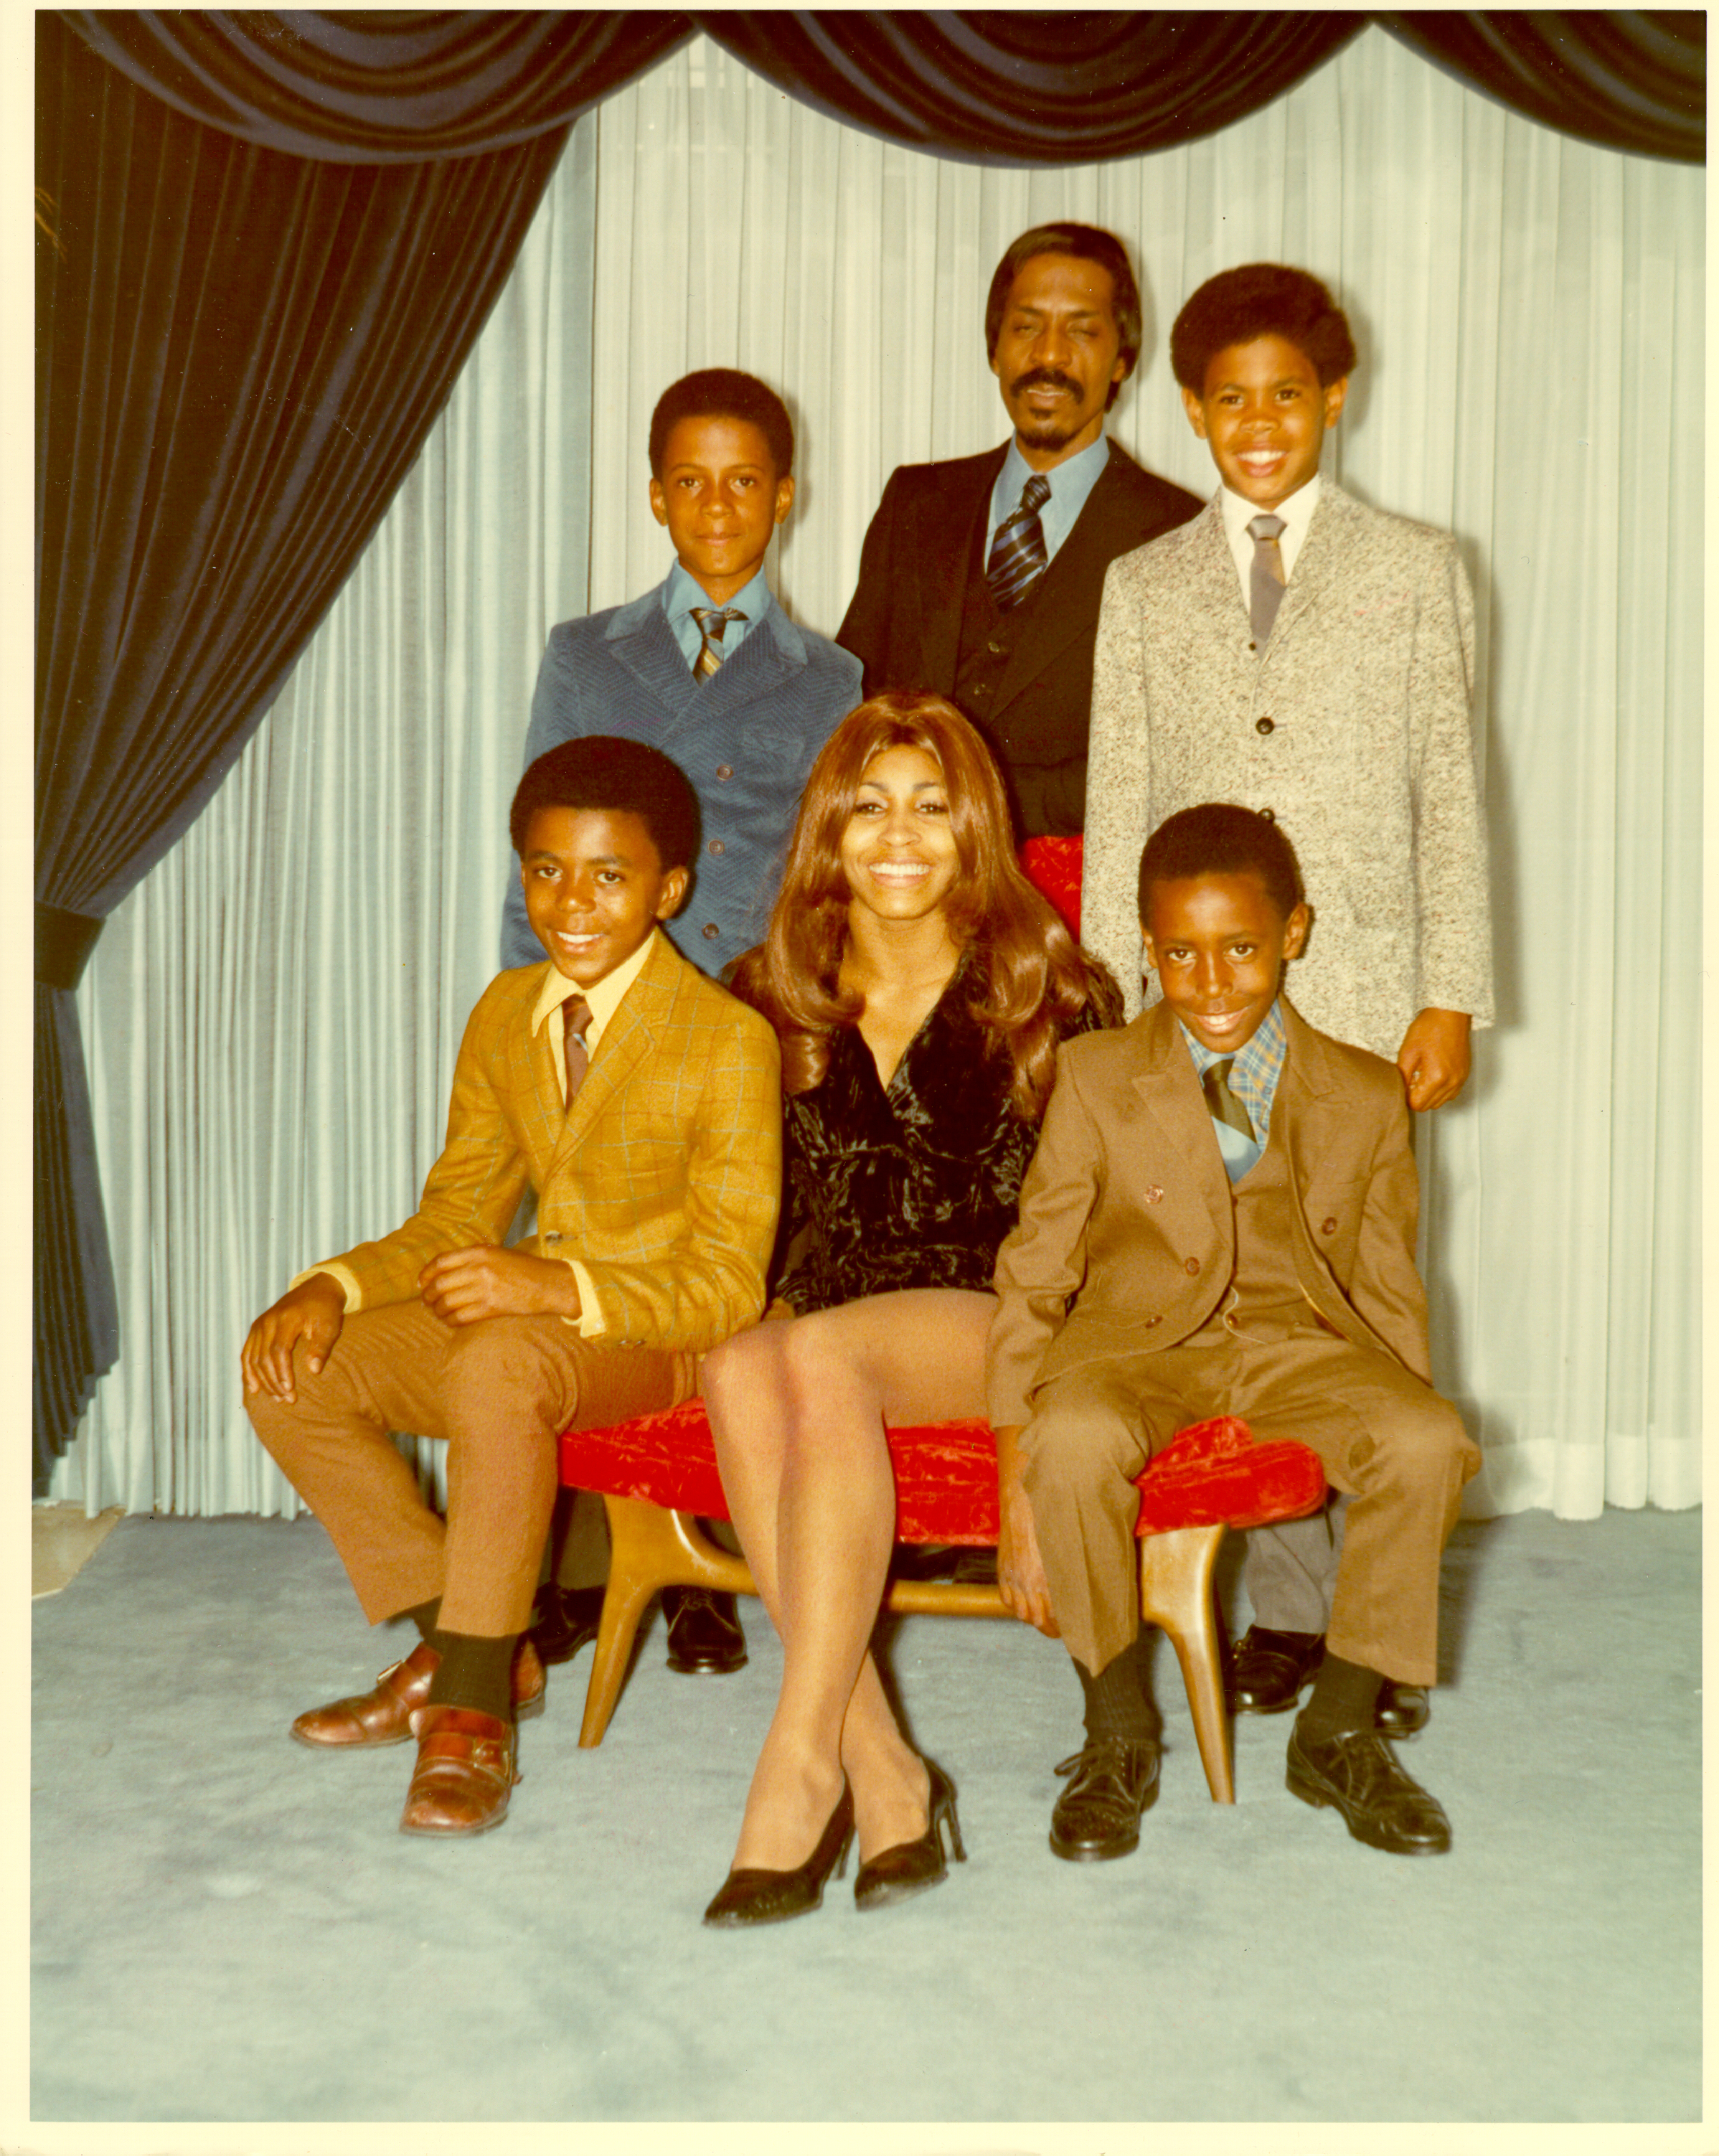 Tina Turner, Ike Turner, and their children, Michael, Ike Jr., Ronnie, and Craig Hill. | Source: Getty Images